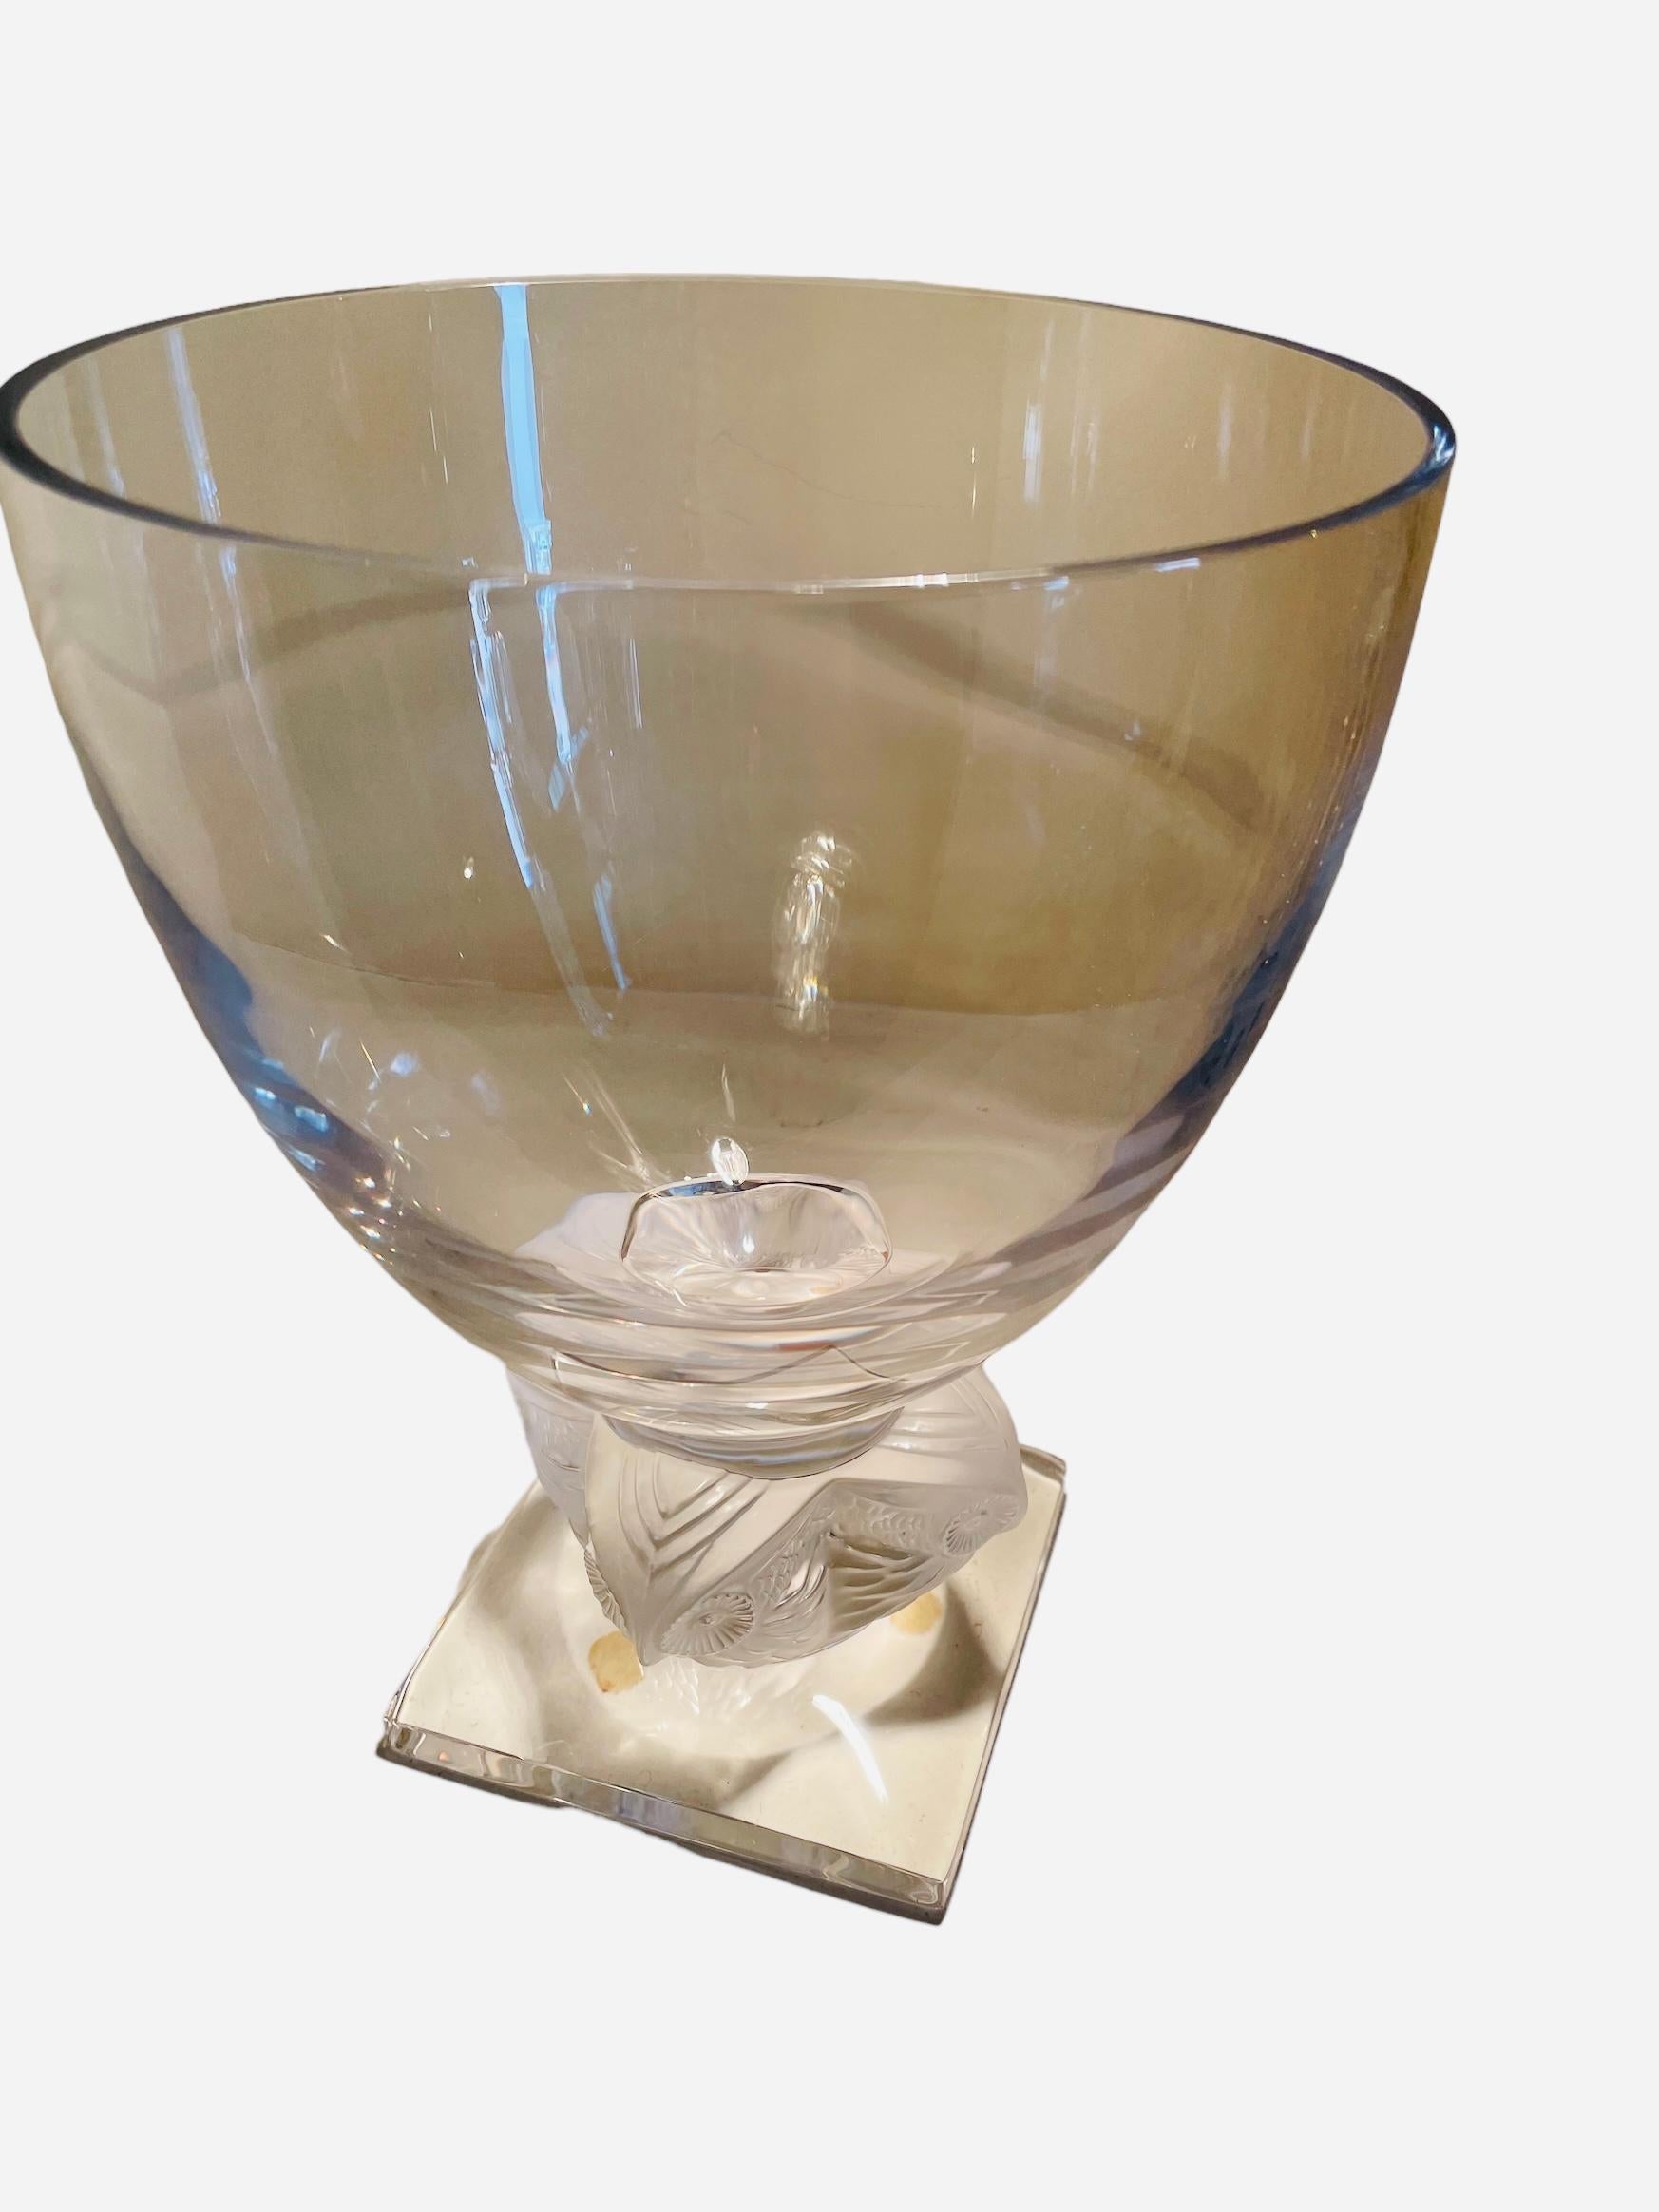 This is a Lalique Crystal “Grand Ducs” Owl flower vase. It depicts a large round bowl that is supported by the frosted crystal heads of four owls. Then, they are attached to a clear crystal square base. At one of the border of the base, it is found